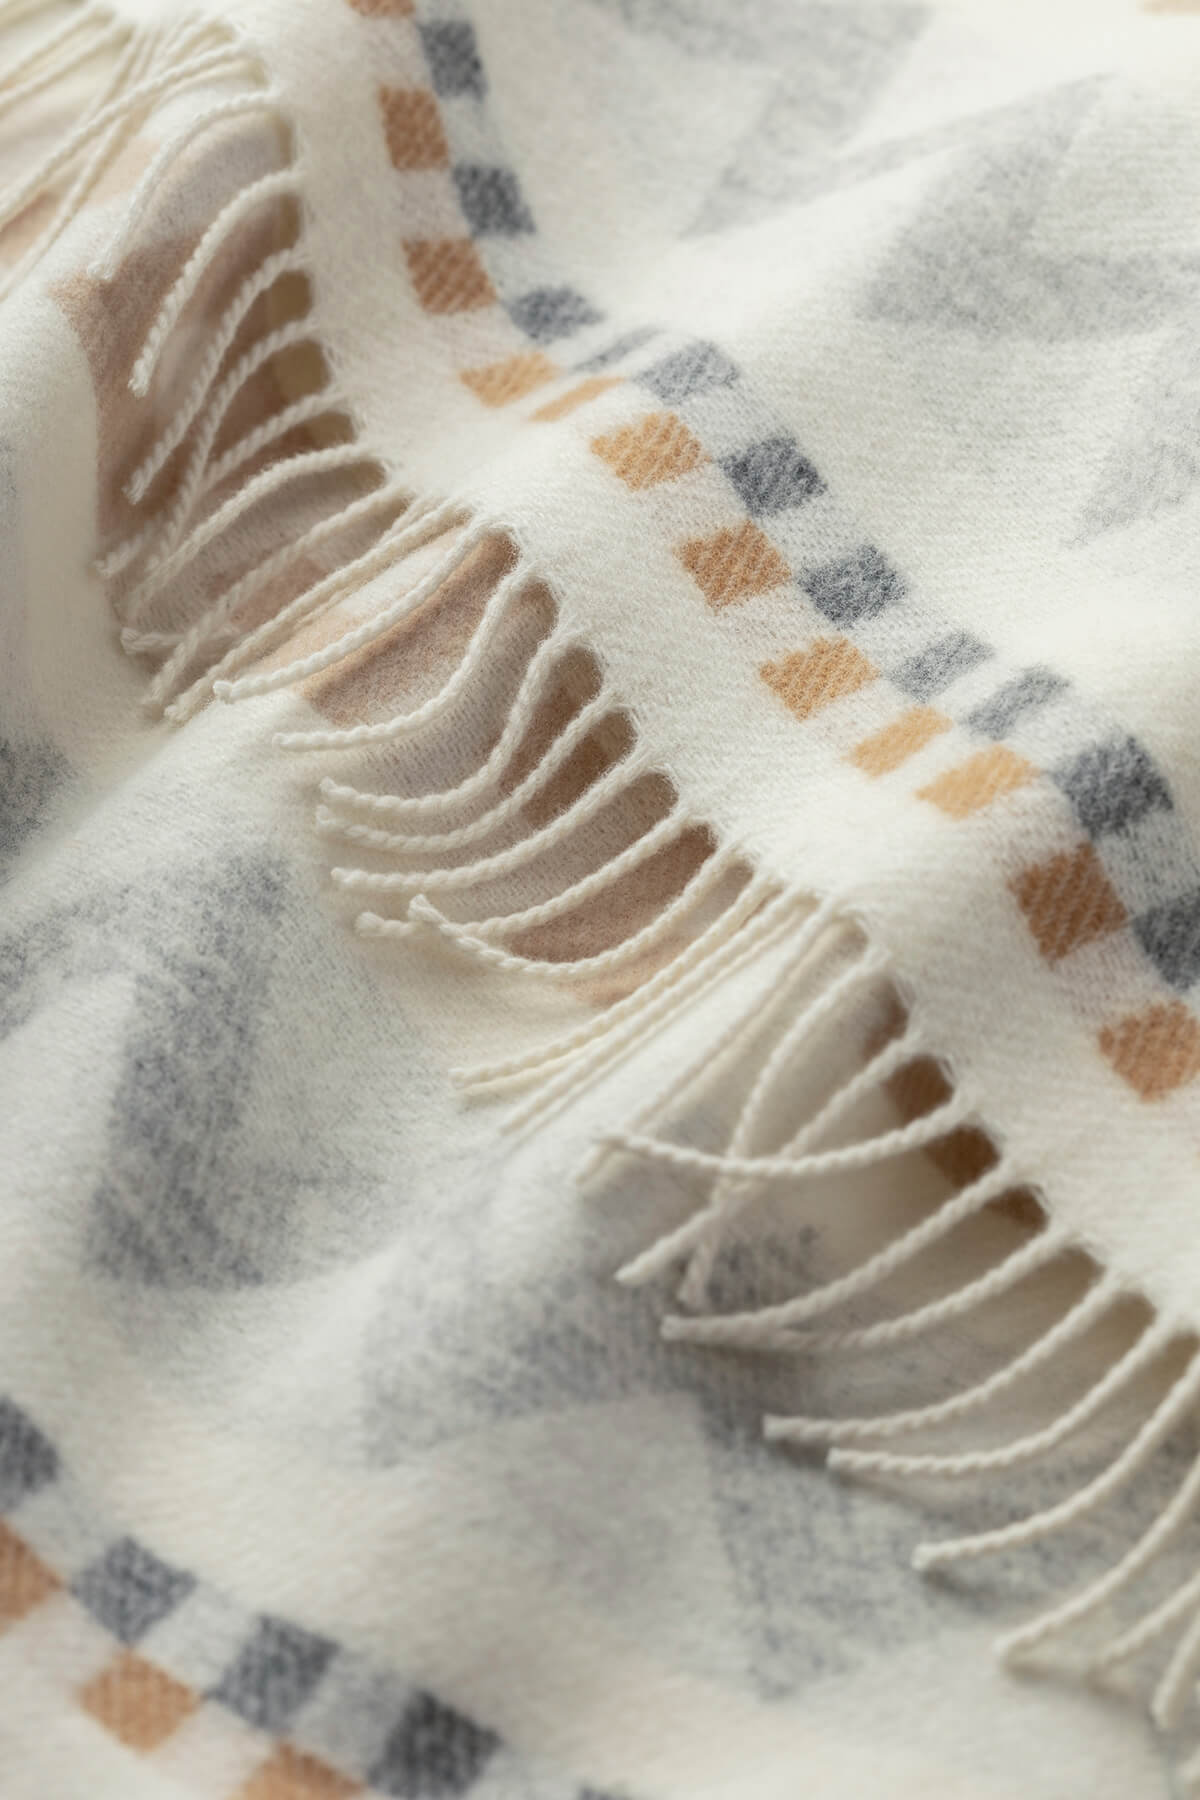 Detail Shot of Johnstons of Elgin Children's Zig Zag Blanket in shades of grey, camel, and cream on a white back ground. WB002334RU7278ONE